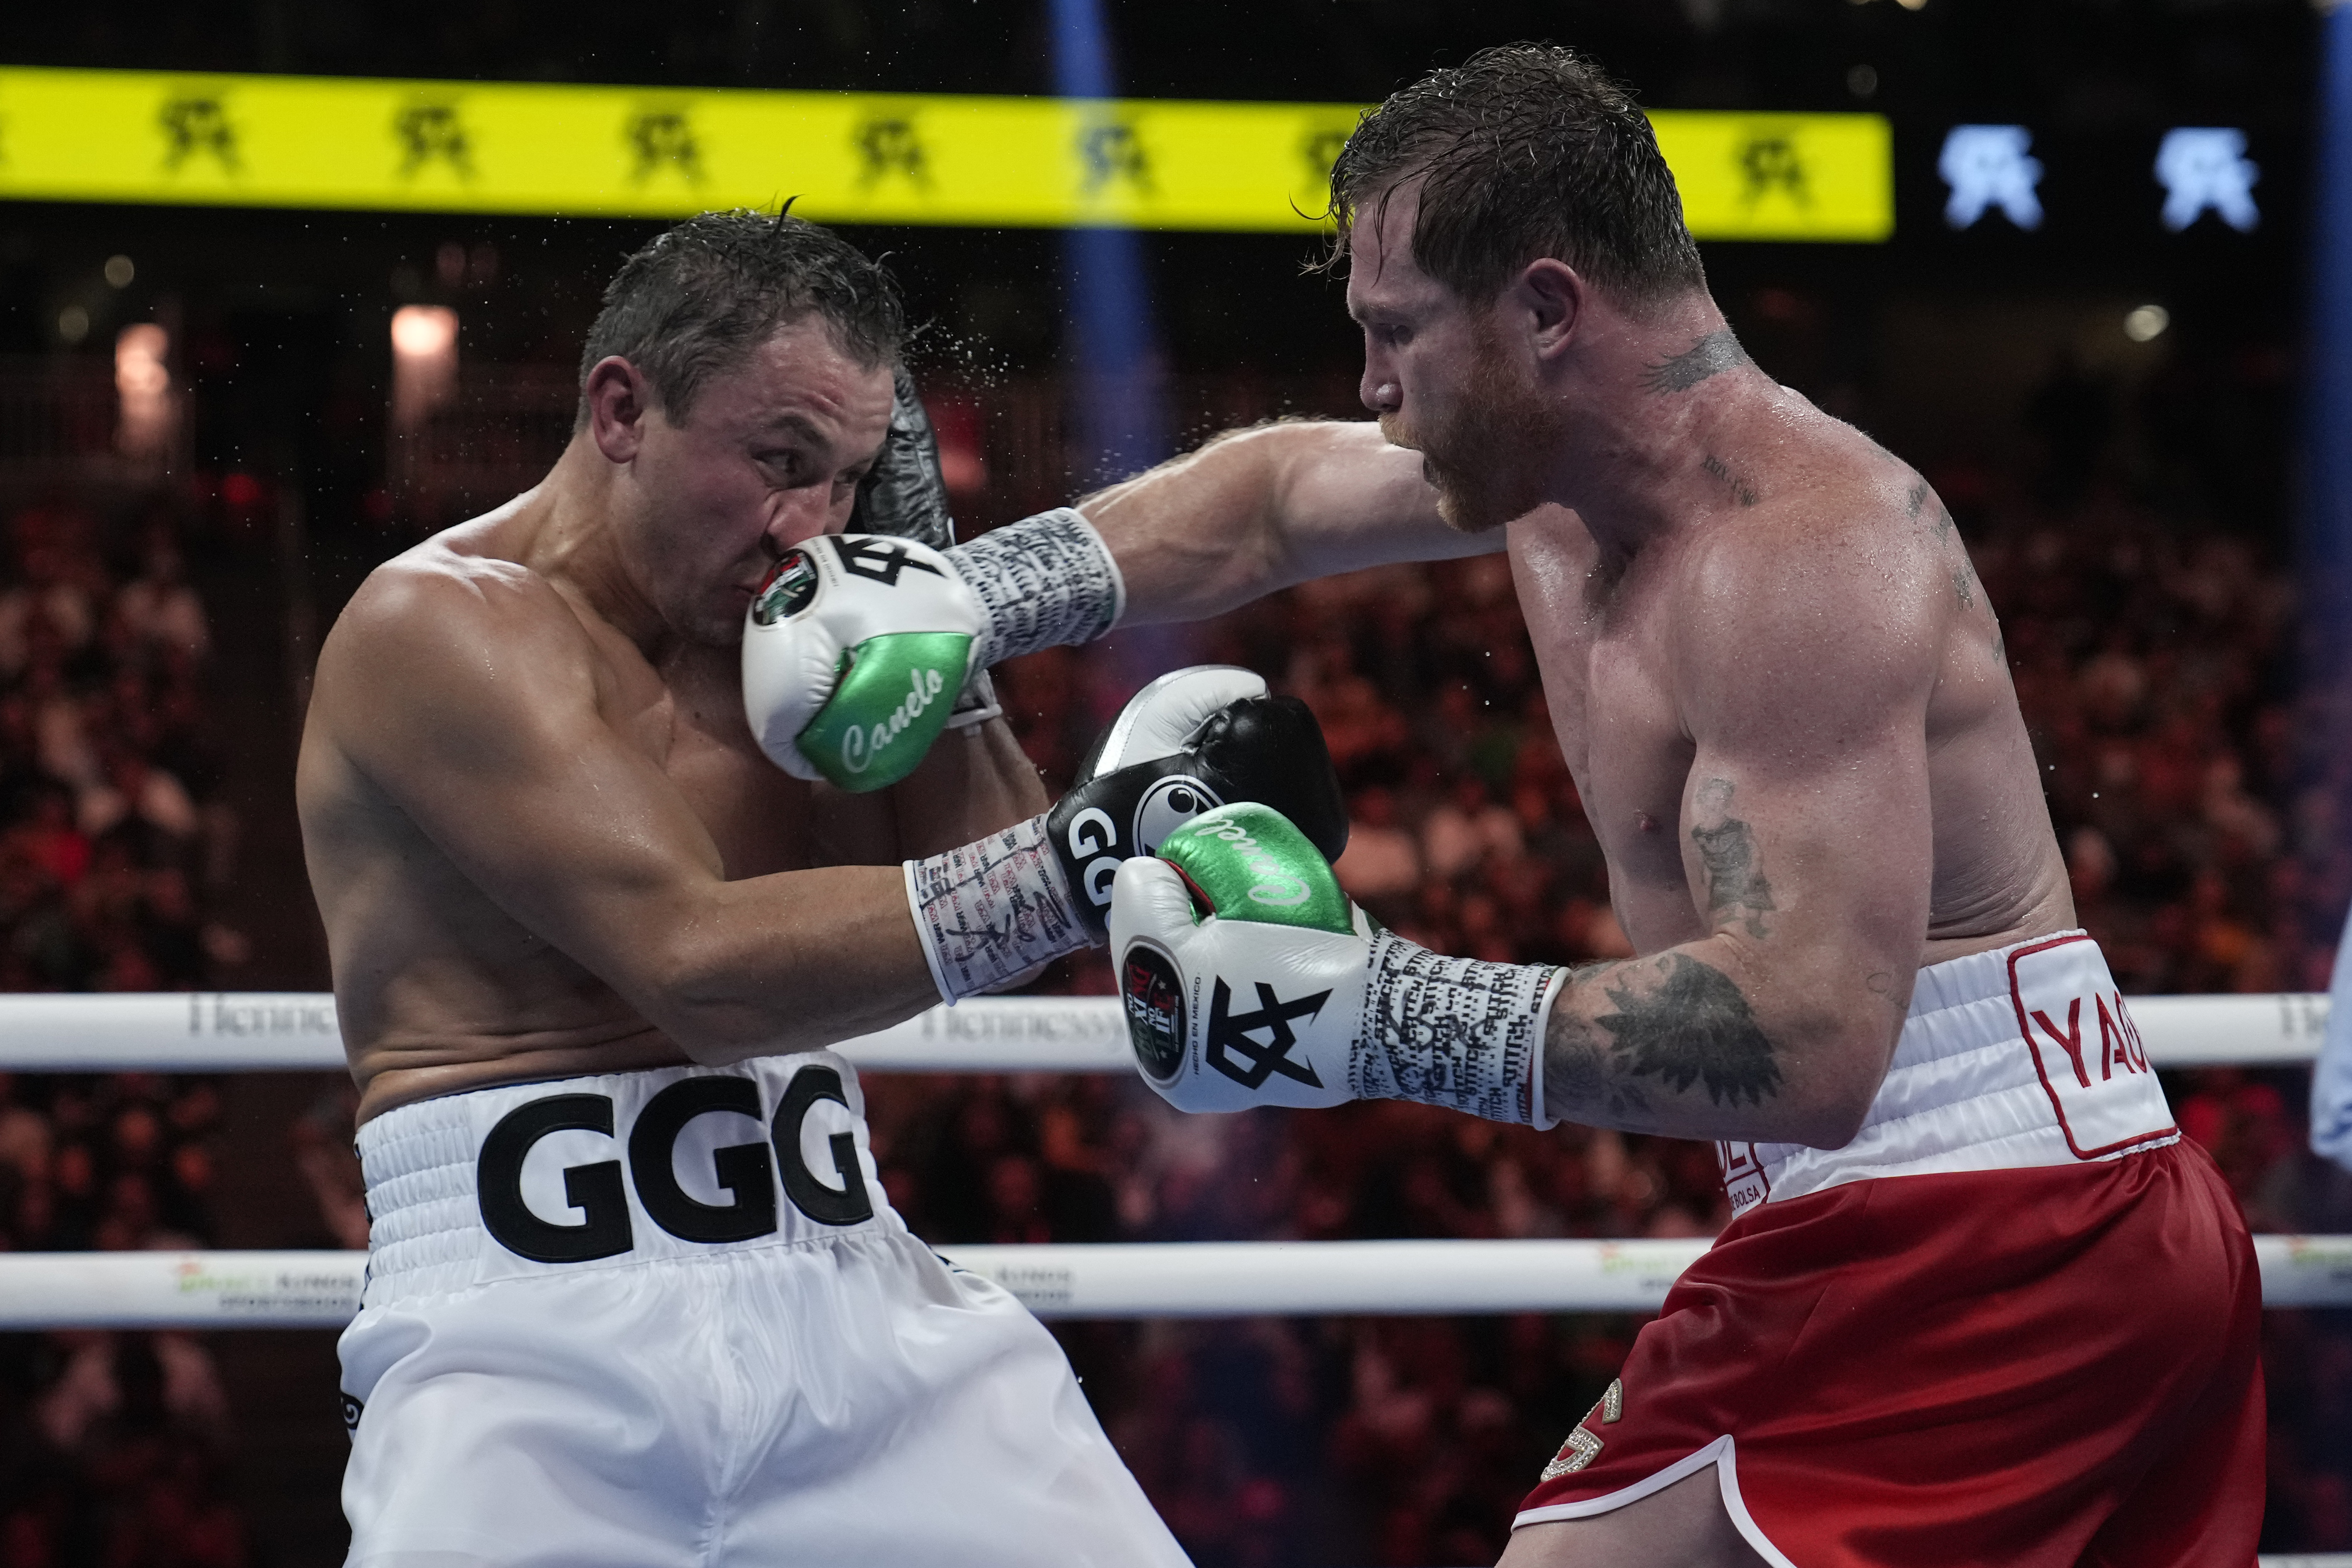 , Canelo Alvarez DOMINATES Gennady Golovkin on points in Las Vegas trilogy fight to end iconic rivalry on top